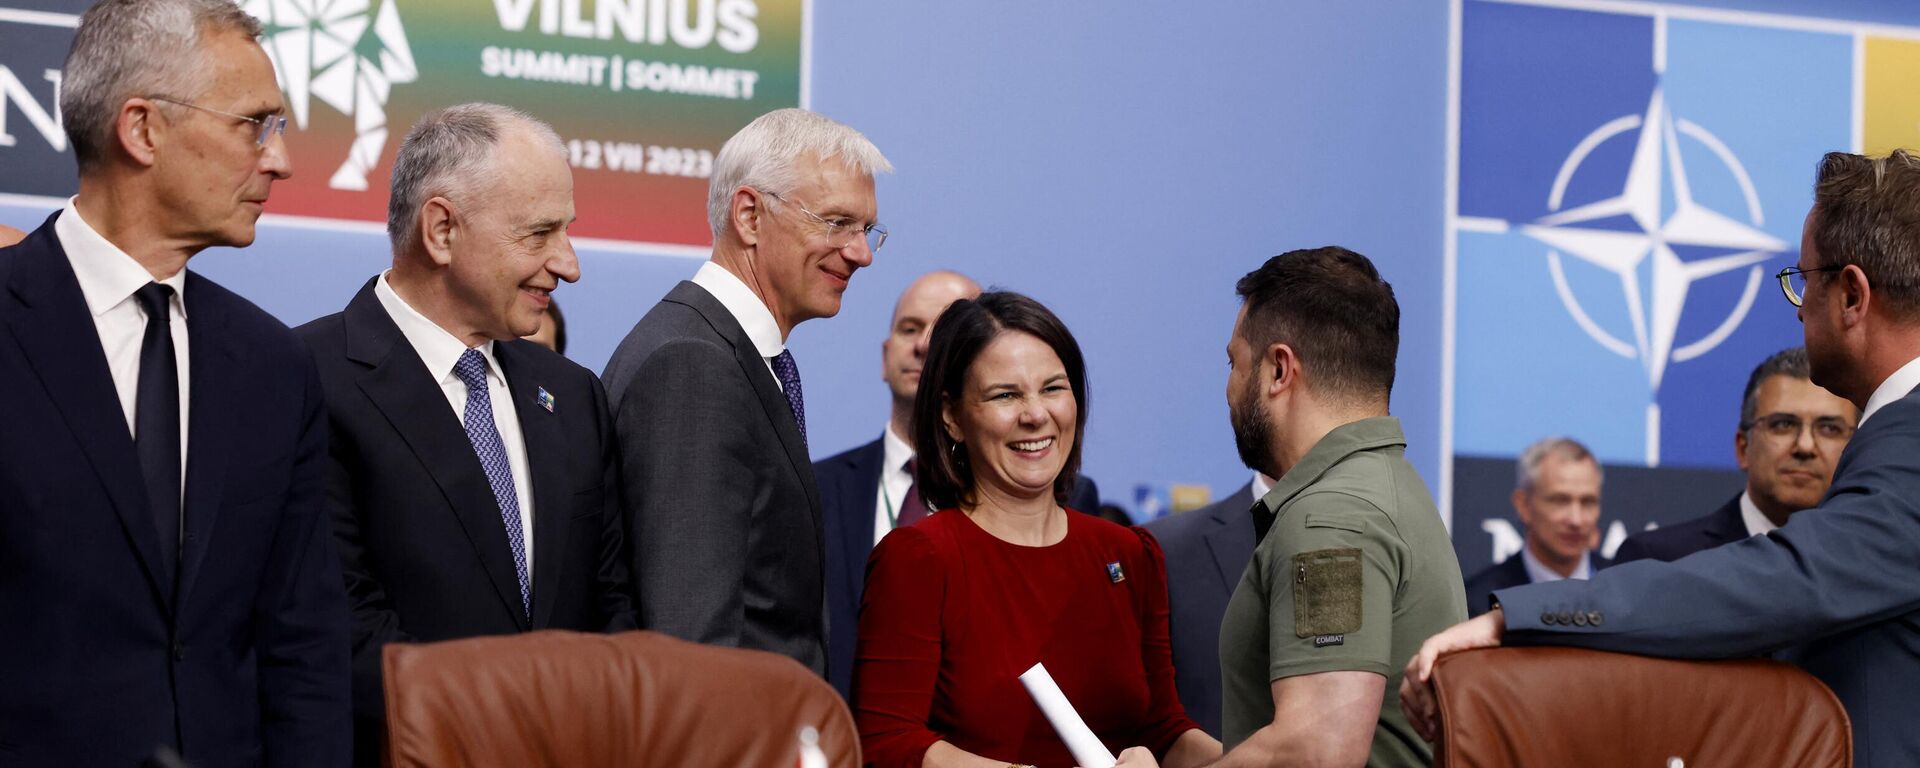 Ukraine's President Volodymyr Zelensky greeted by NATO Secretary General Jens Stoltenberg and German Foreign Minister Annalena Baerbock as he arrives to attend a meeting of the NATO-Ukraine Council during the NATO Summit in Vilnius on July 12, 2023. - Sputnik International, 1920, 06.12.2023